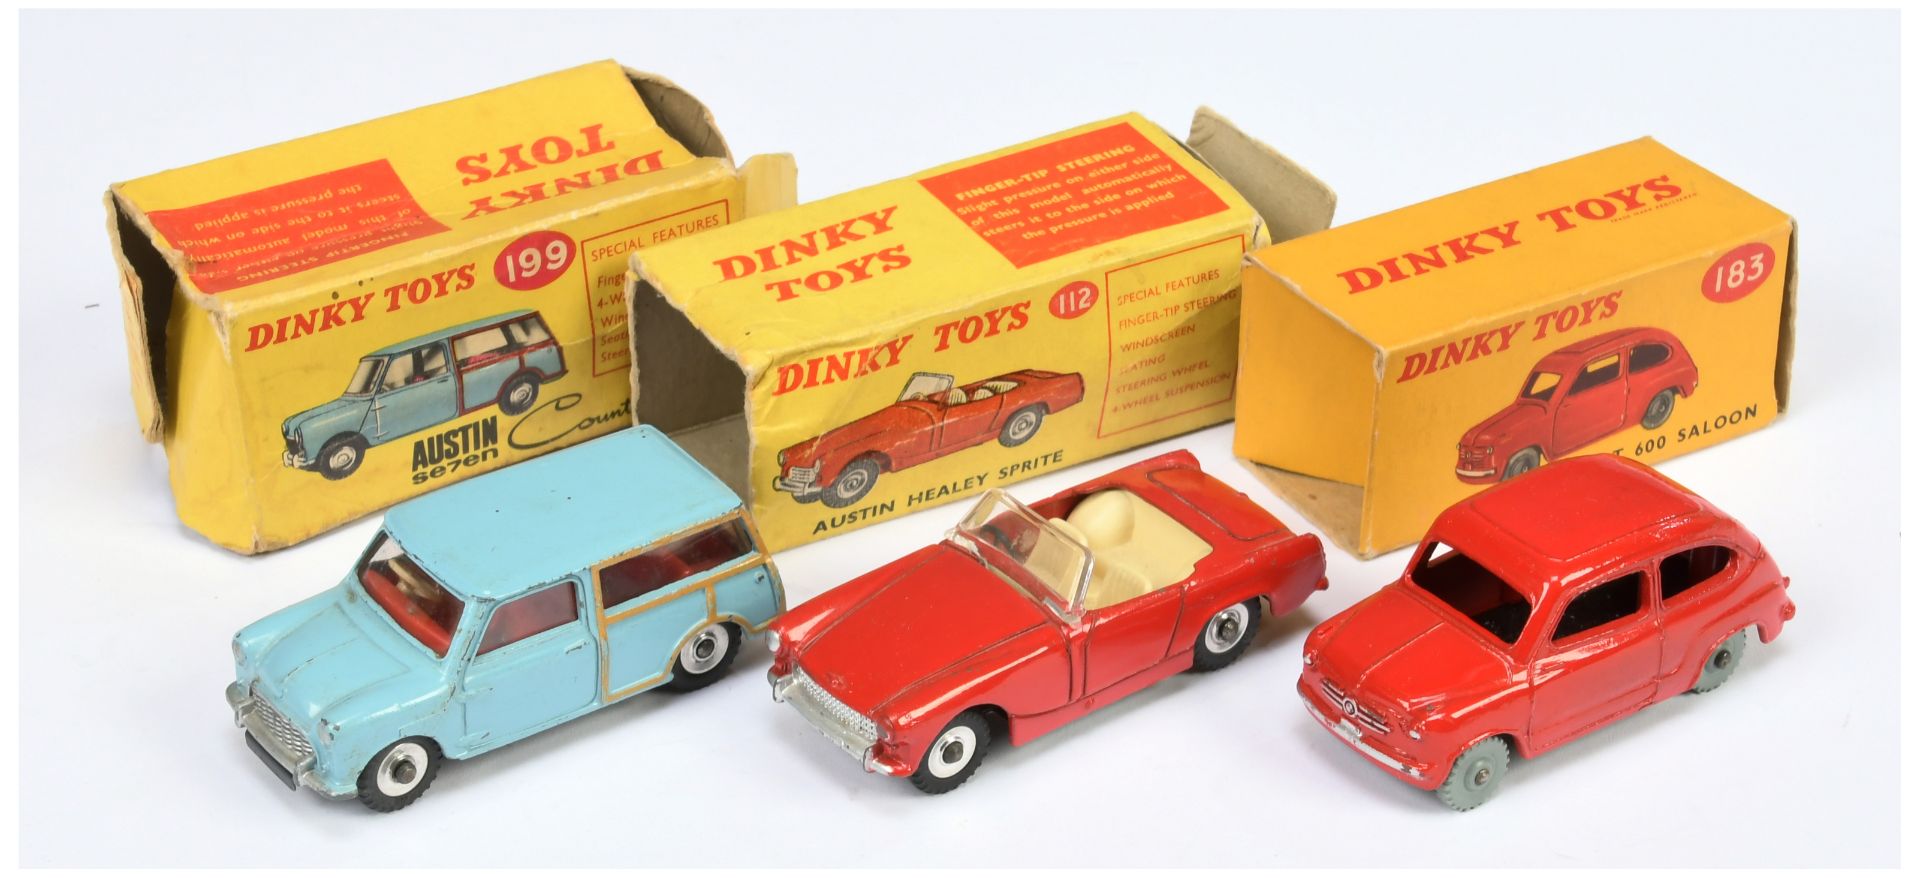 Dinky Toys Group To Include (1) 112 Austin Healey Sprite - Red, (2) 183 Fiat 600 Saloon - Red and...